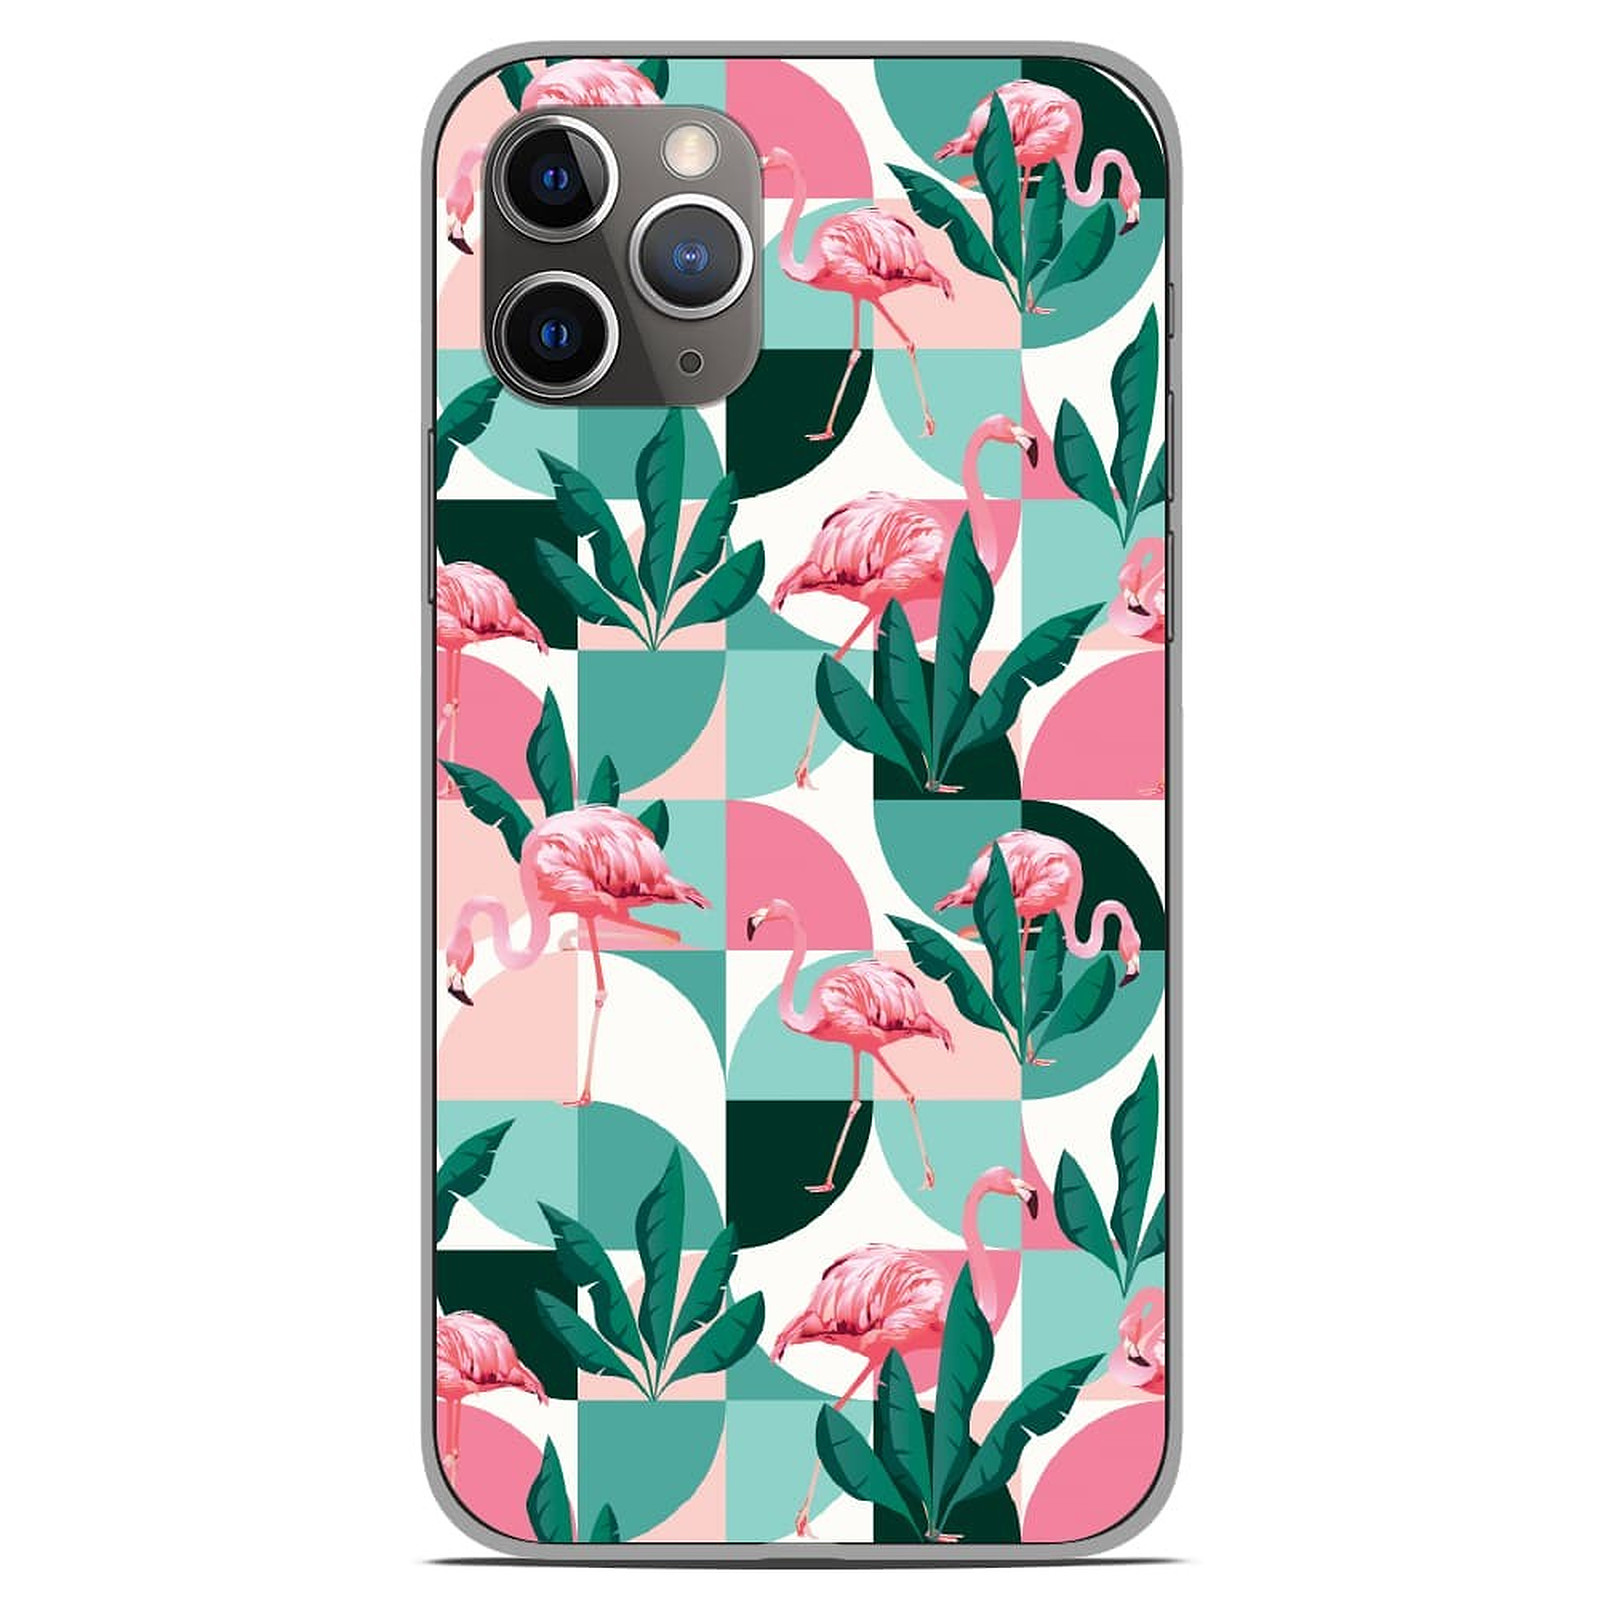 1001 Coques Coque silicone gel Apple iPhone 11 Pro motif Flamants Roses ge´ome´trique - Coque telephone 1001Coques